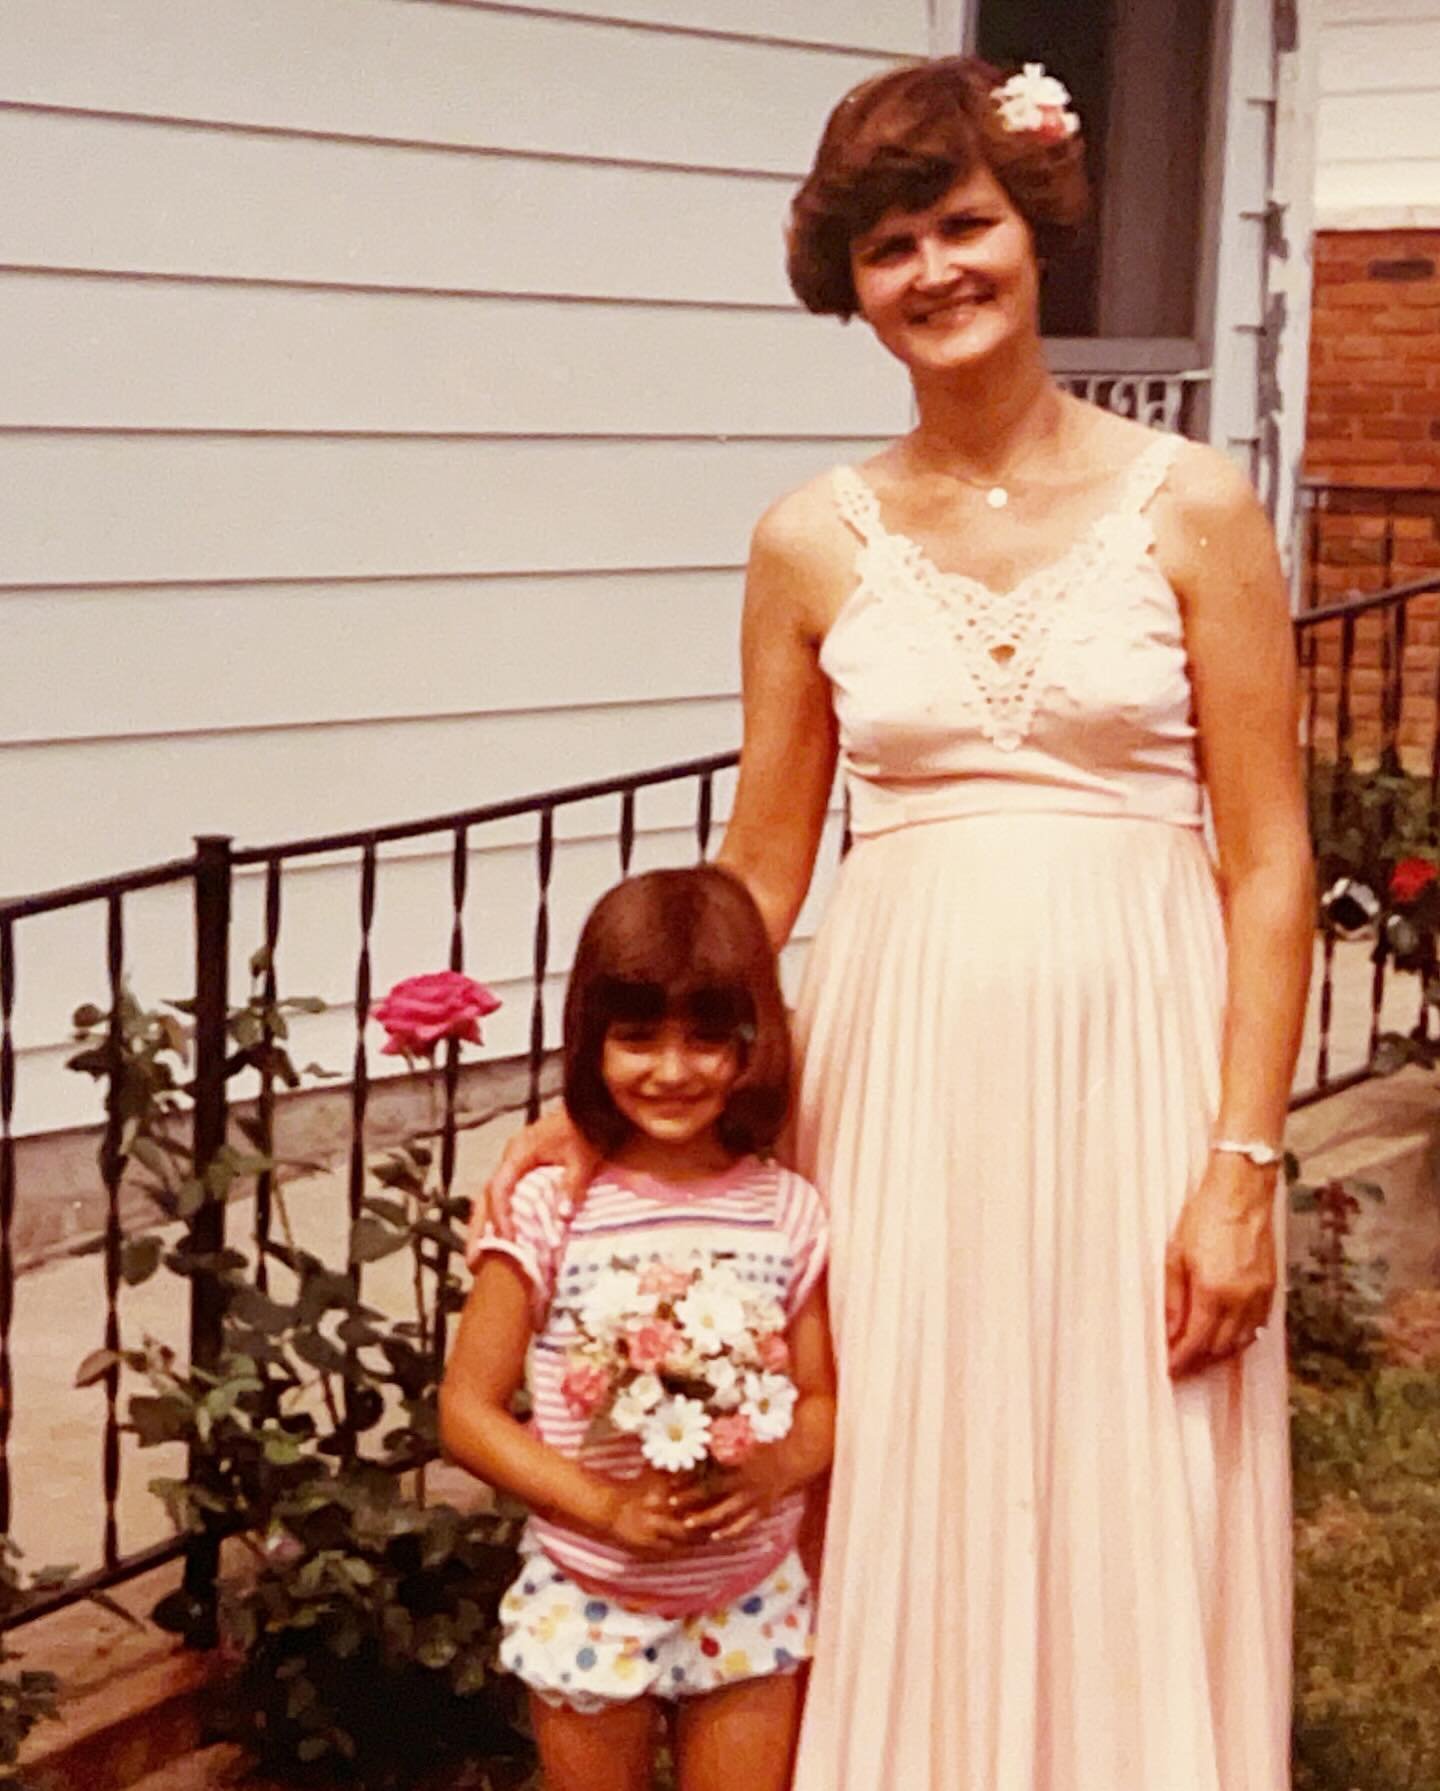 Happy Mother&rsquo;s Day to the woman I&rsquo;ve always looked up to. ❤️

And hugs to all the moms who are now caring for their mamas. 

#mothersday #sandwichgeneration #momlife